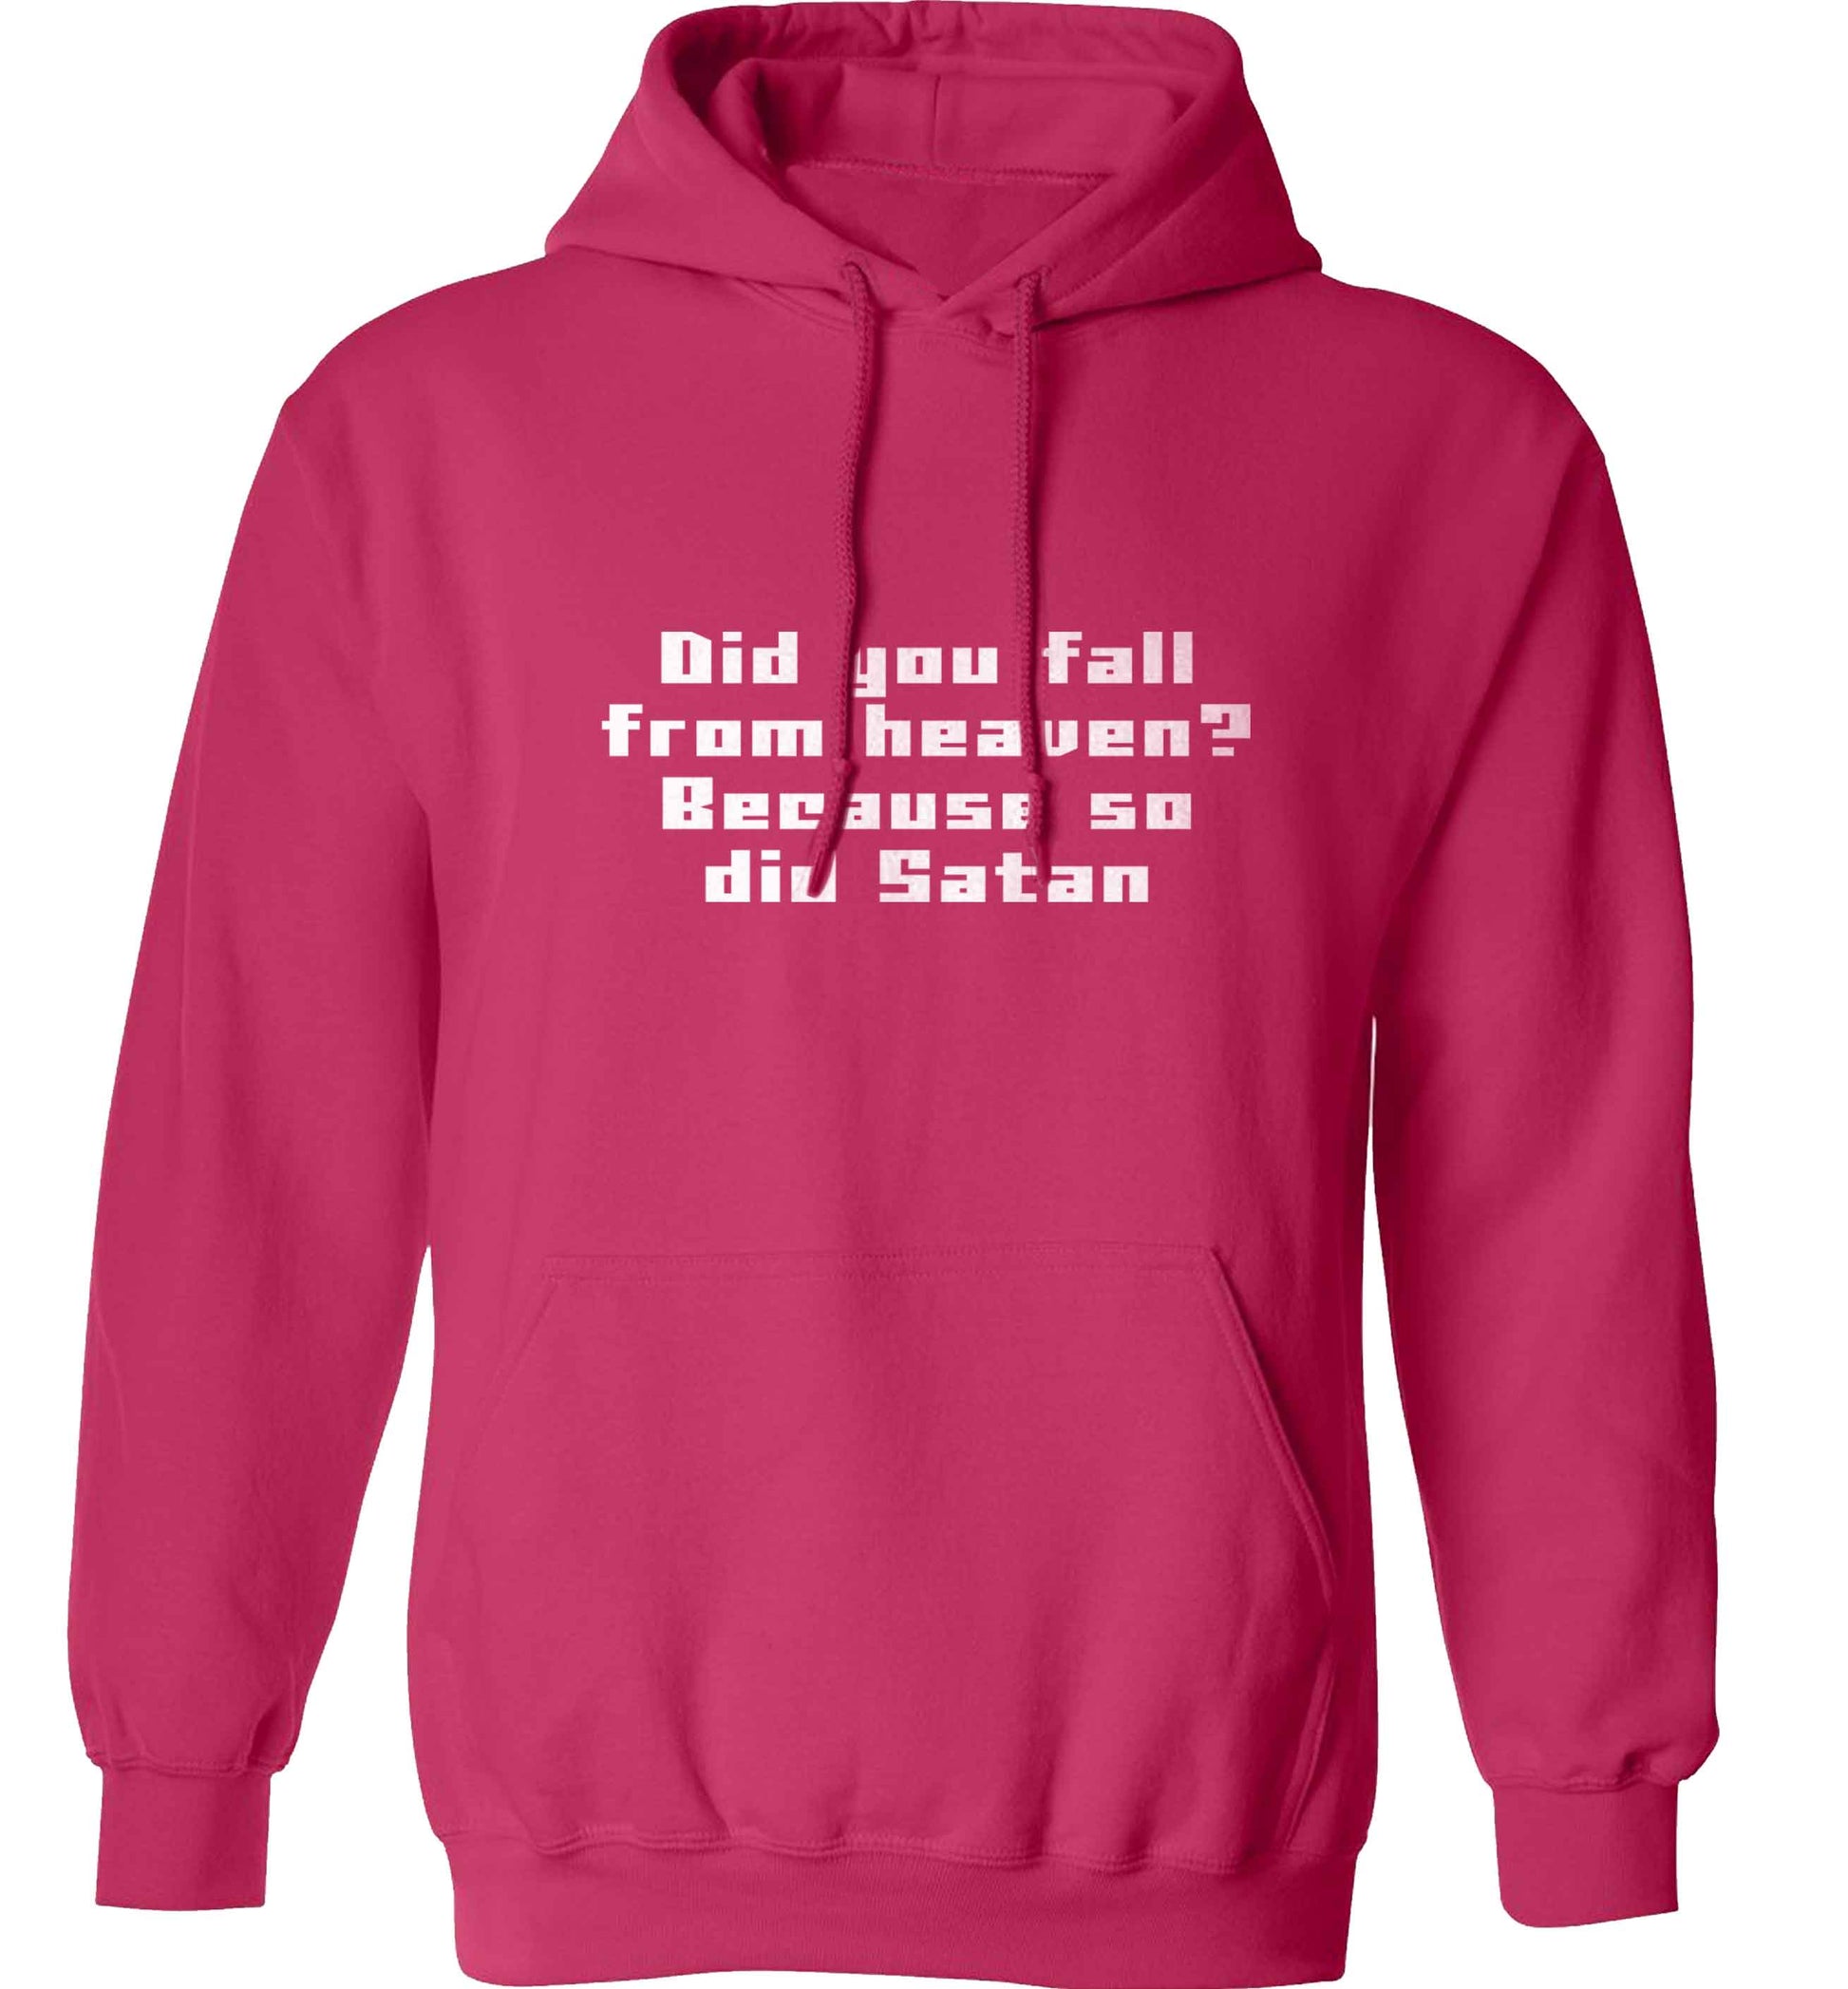 Did you fall from Heaven because so did Satan adults unisex pink hoodie 2XL